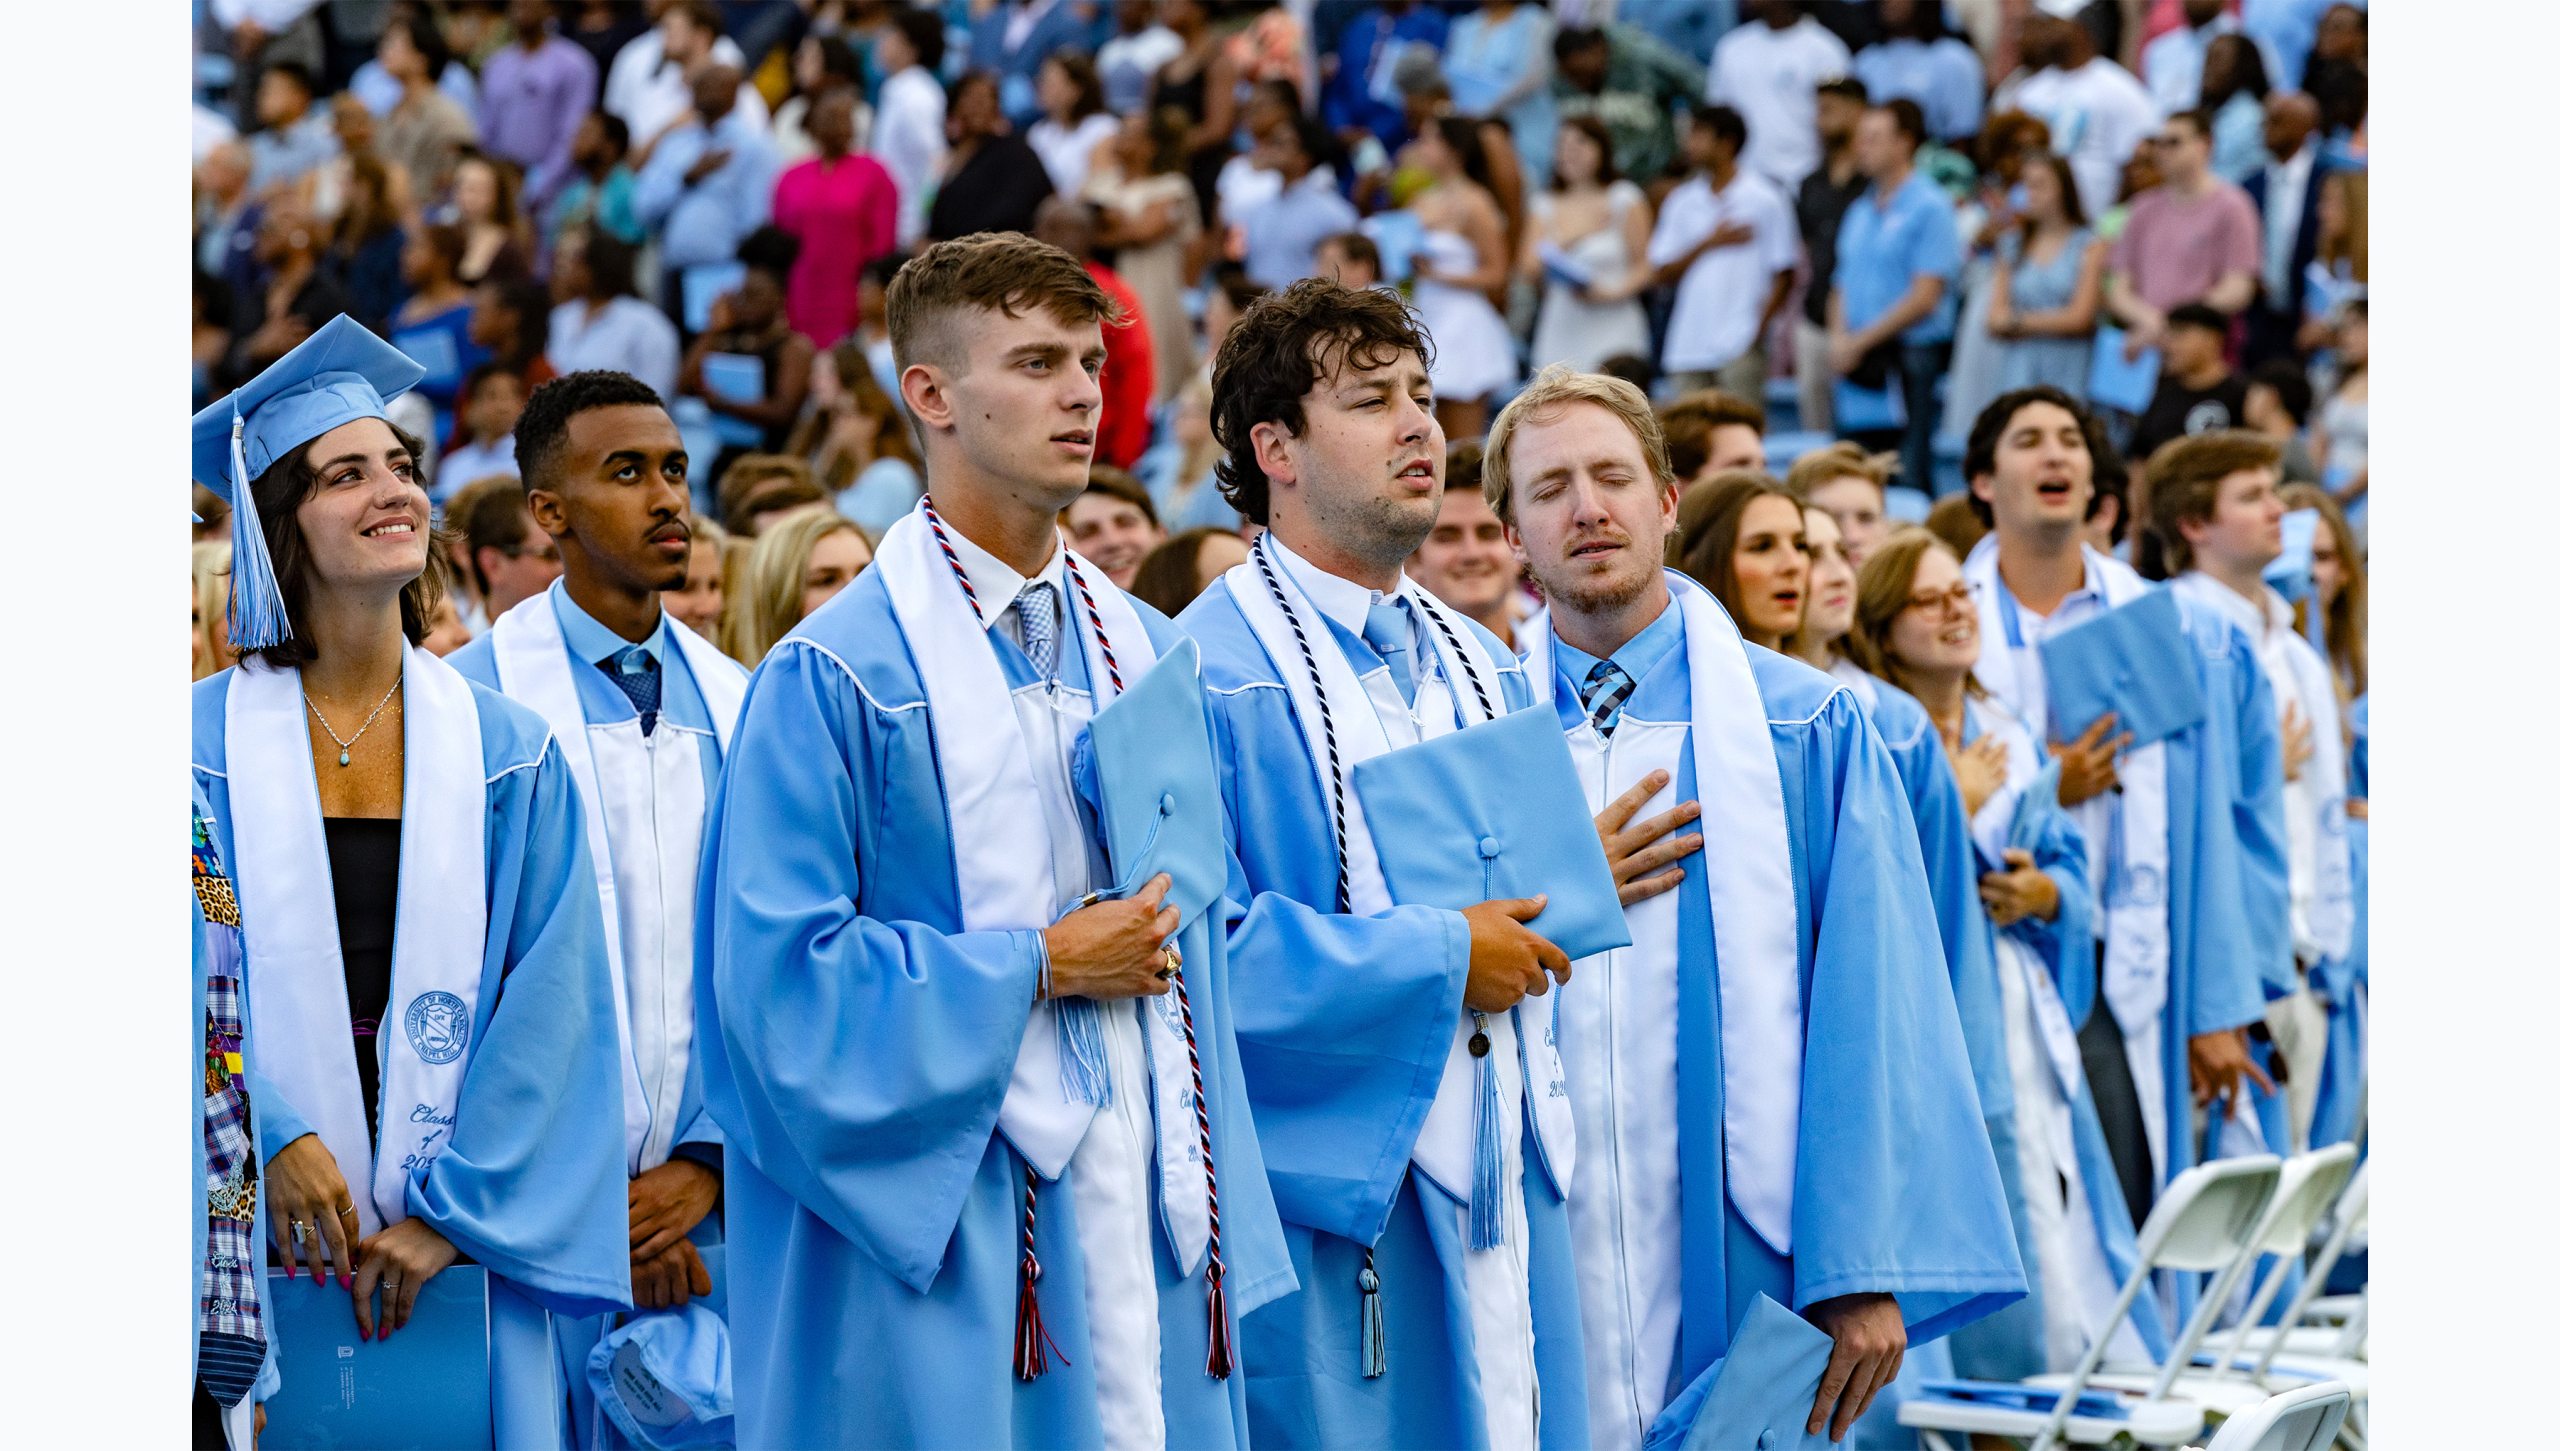 Graduates hold caps over hearts during national anthem